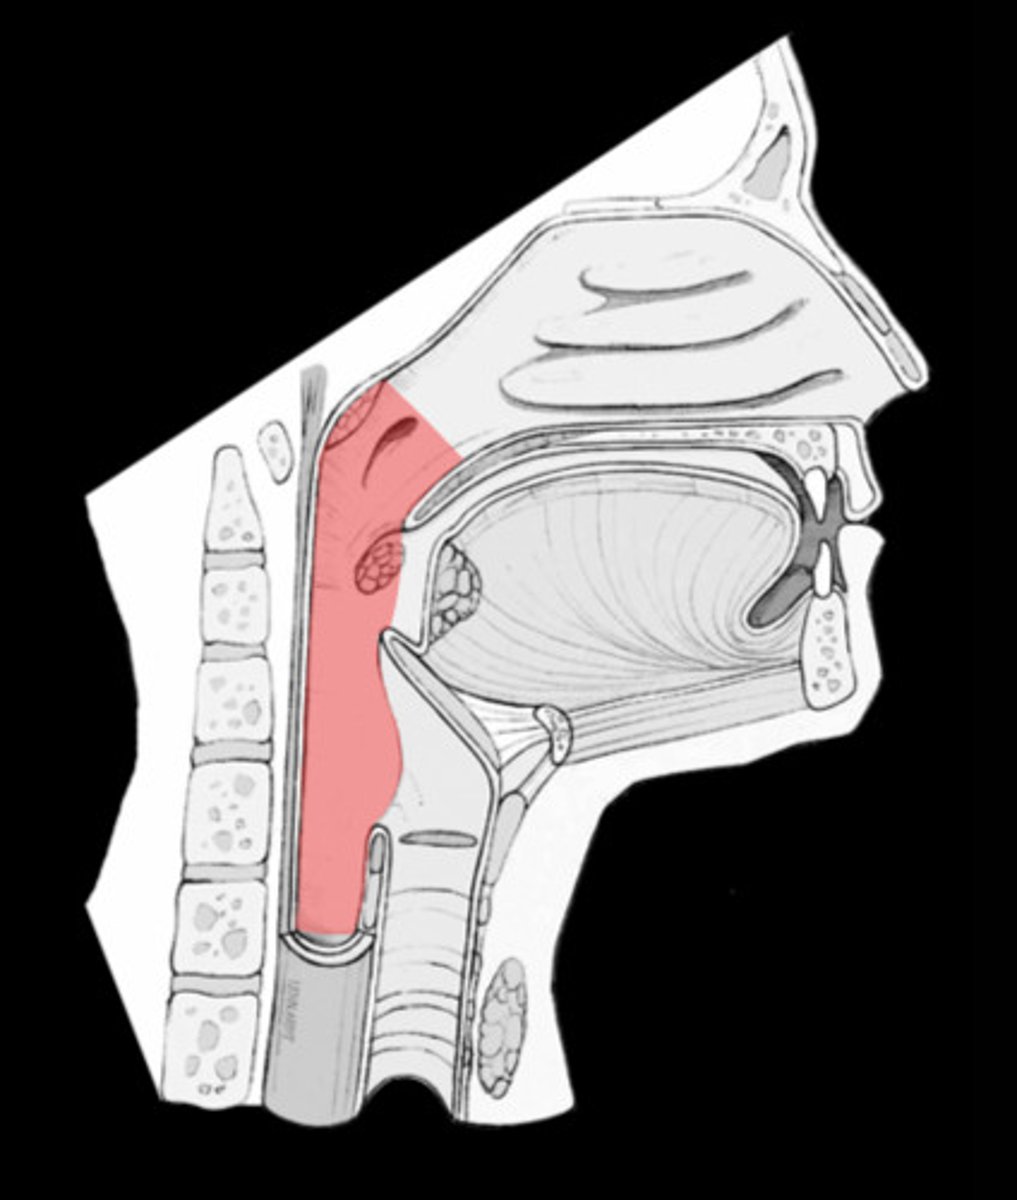 <p>The voluntary phase of swallowing occurs as the bolus is pushed into what structure?</p>